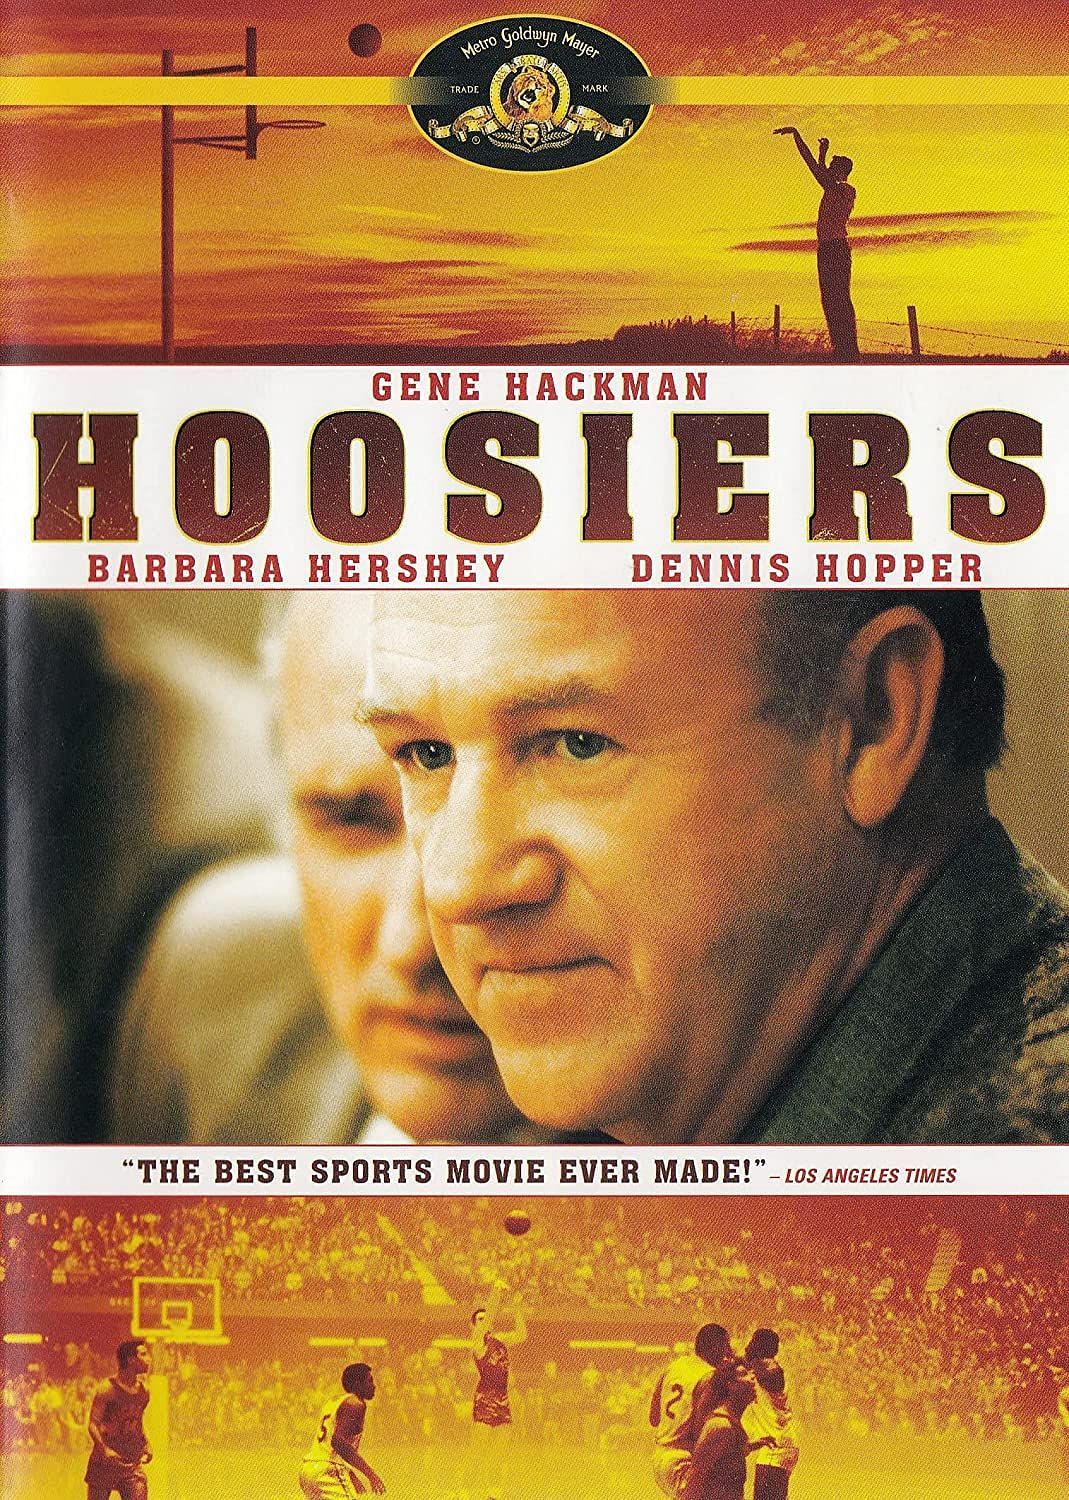 Hoosiers, 1986 (Image via Orion Pictures)